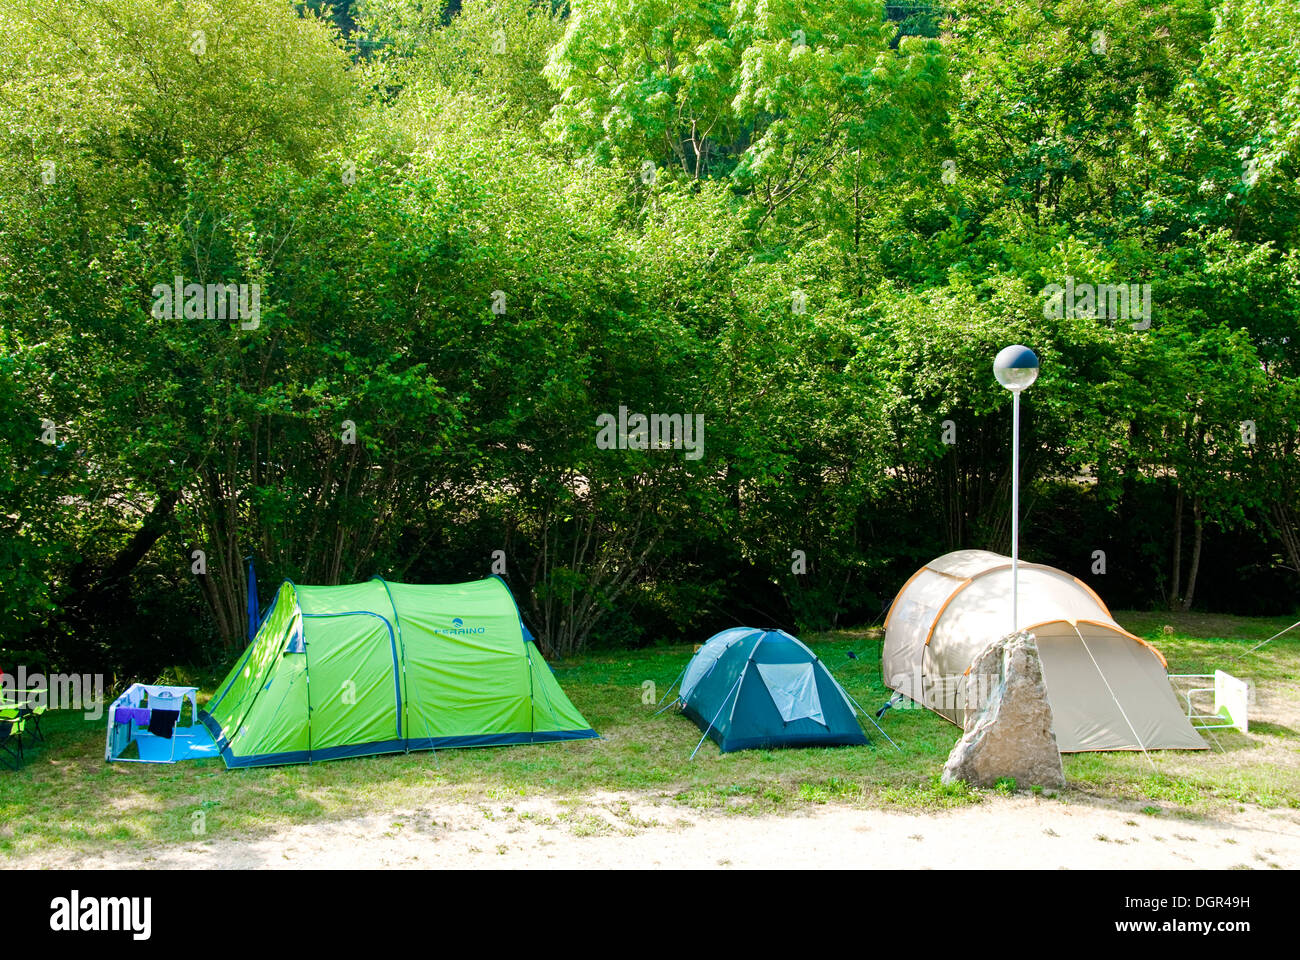 Tents at a campsite Stock Photo